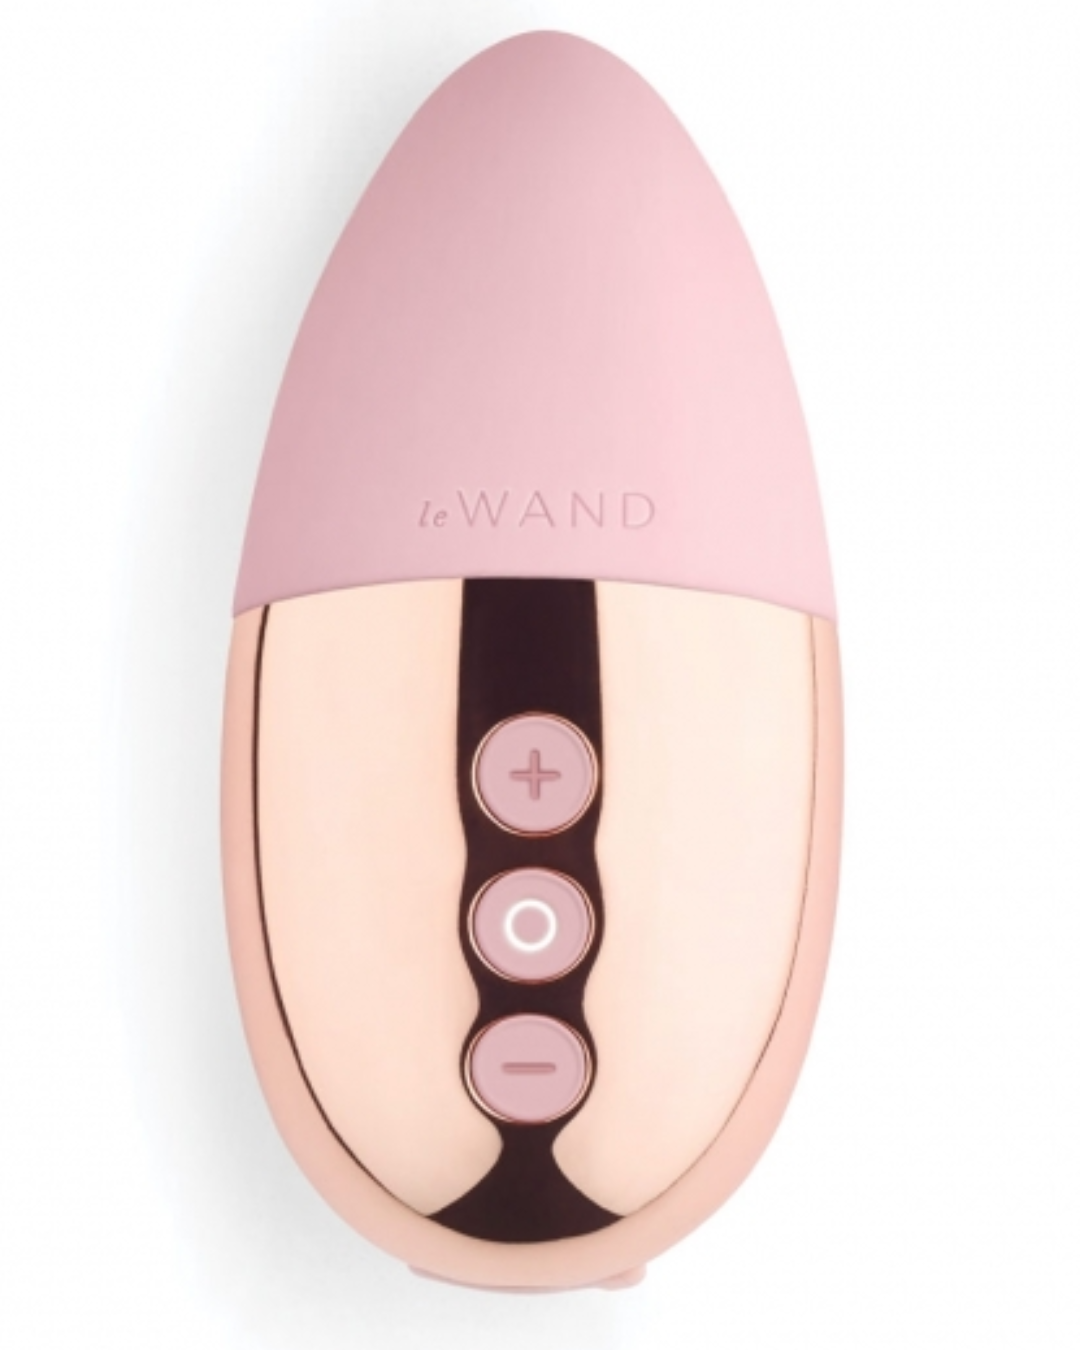 Le Wand Point Weighted Waterproof Silicone Lay-On Vibrator - Rose Gold